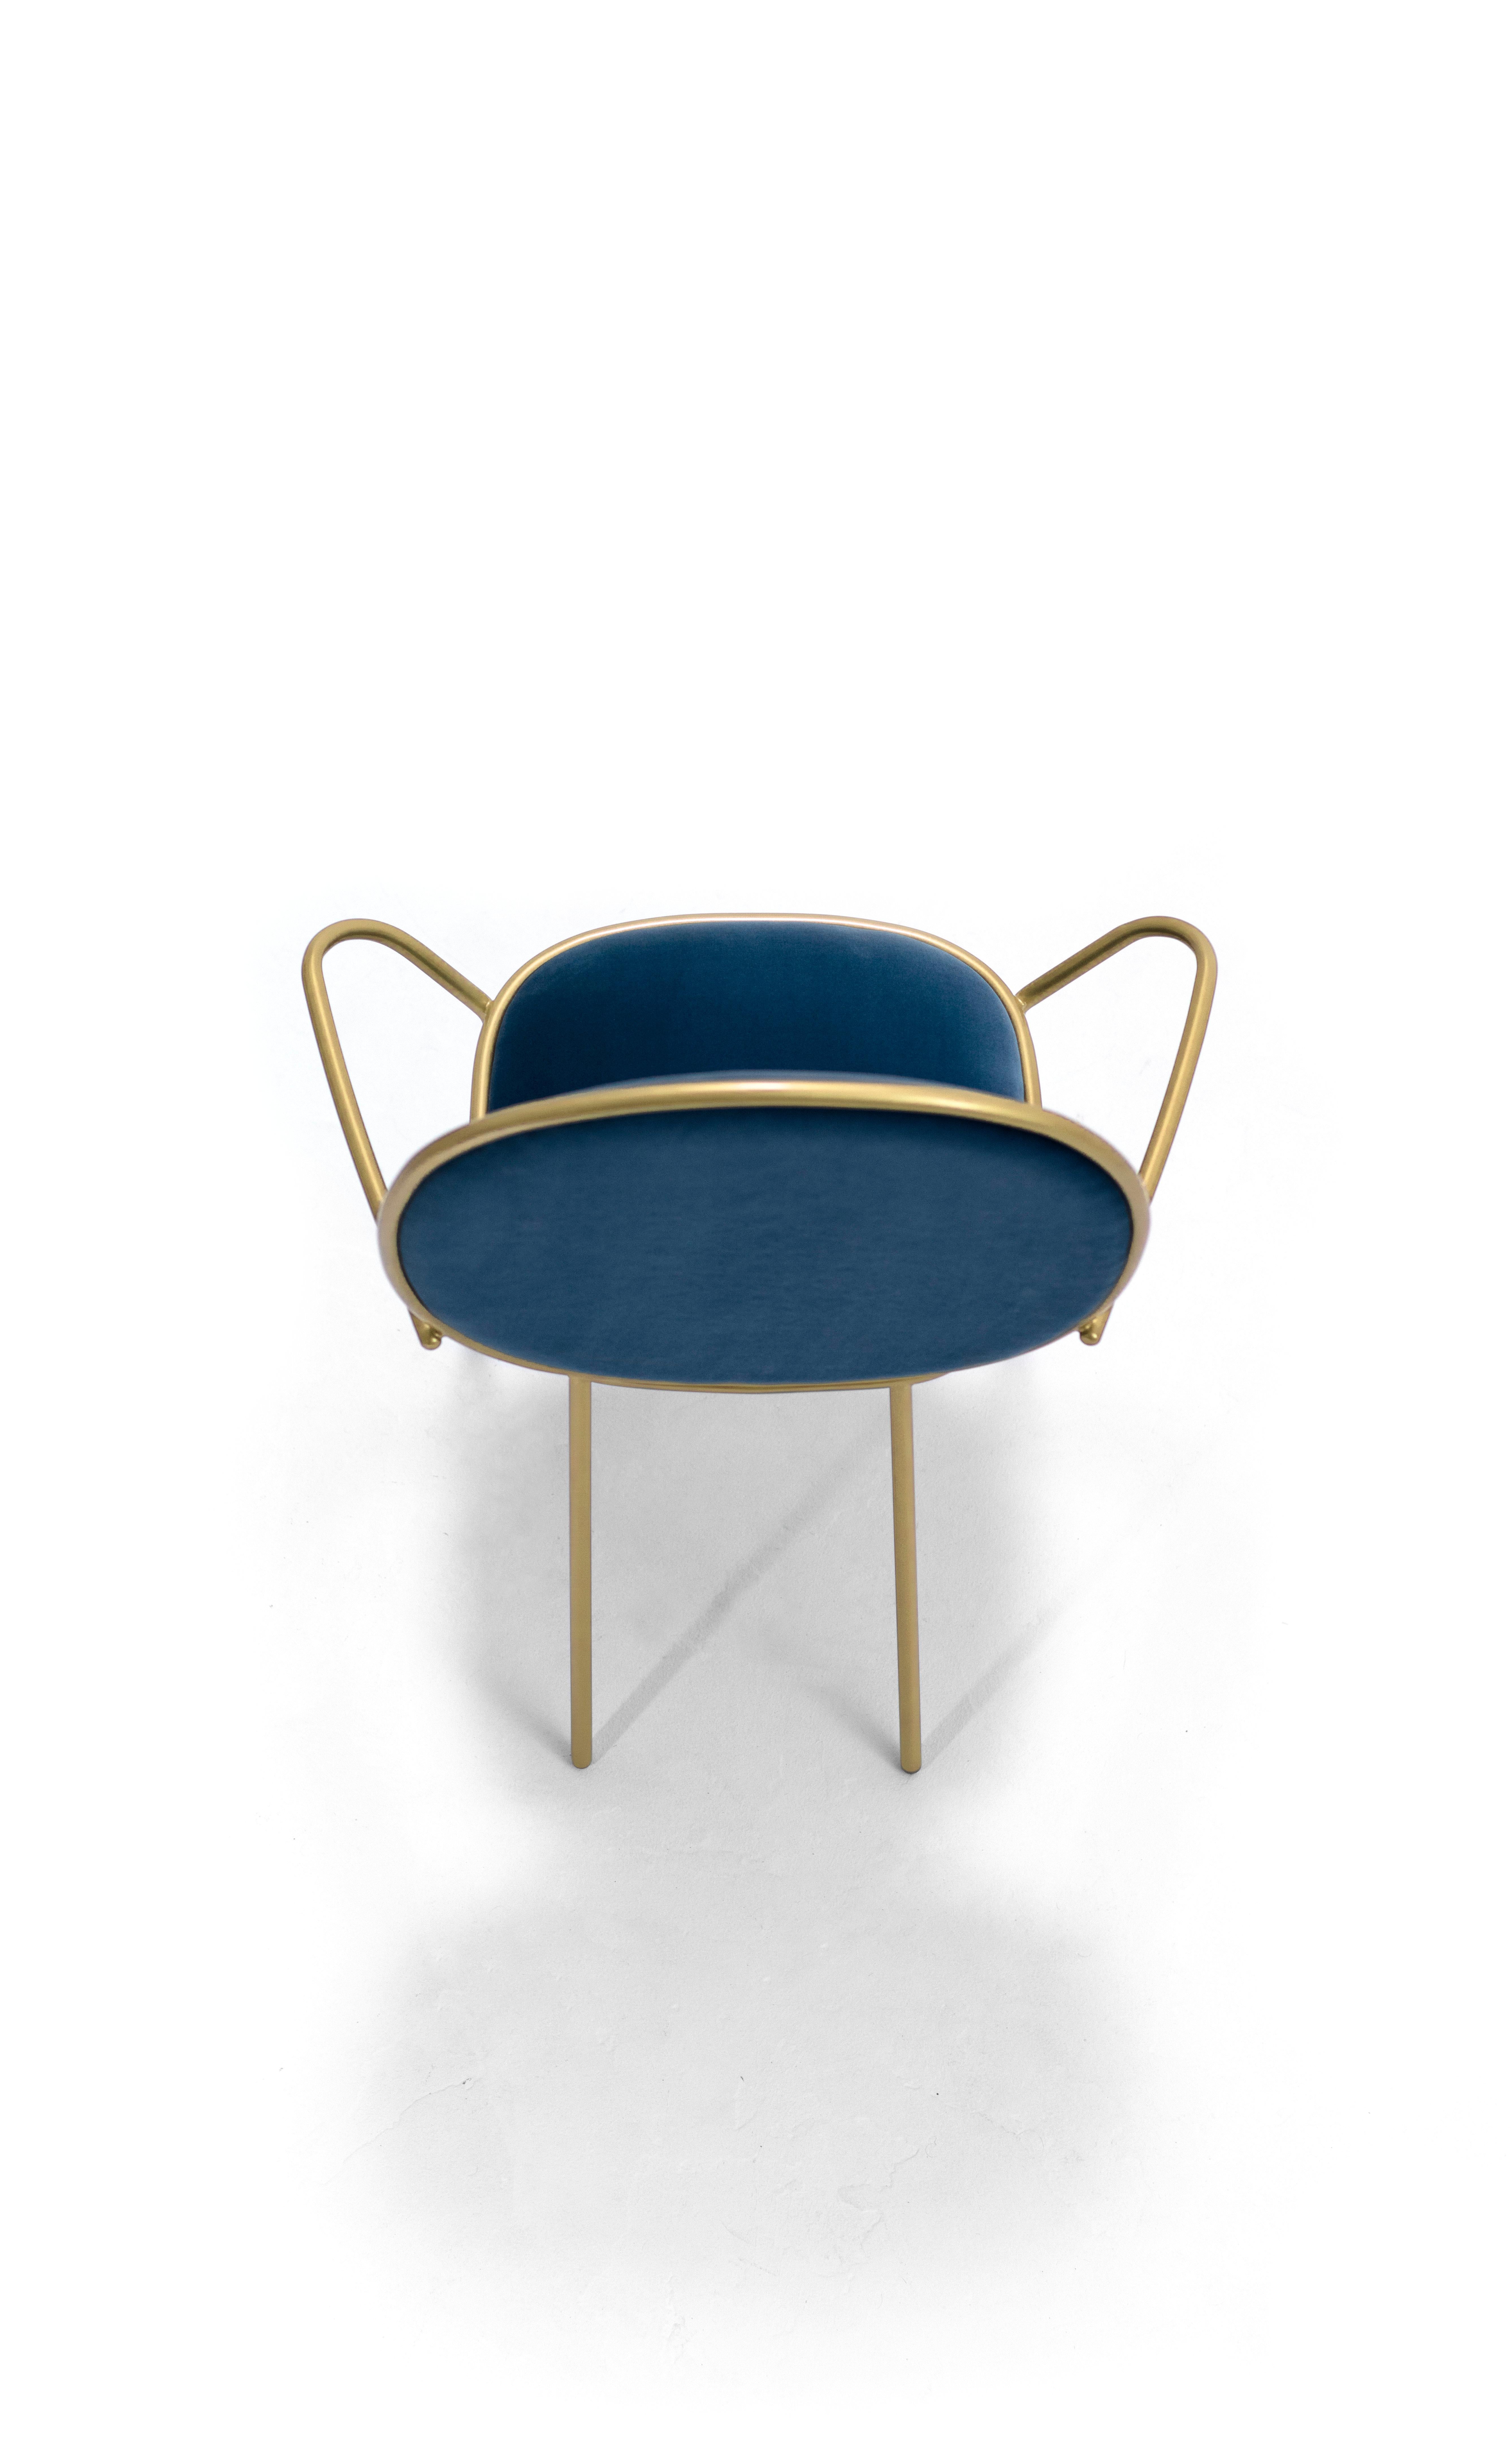 Steel Contemporary Avio Blue Velvet Upholstered Dining Armchair, Stay by Nika Zupanc